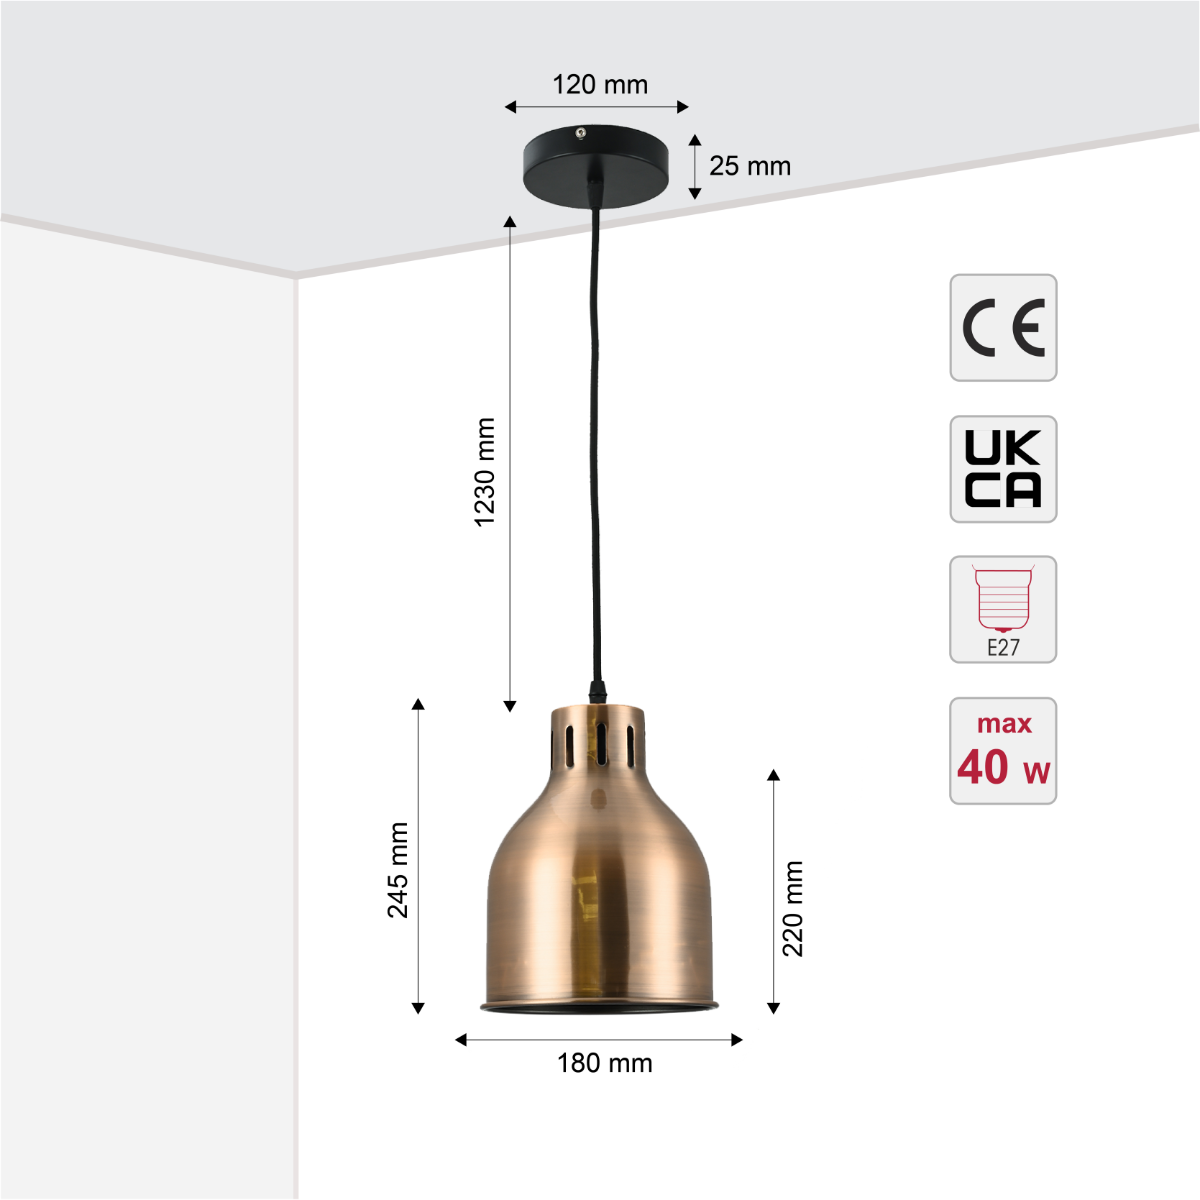 Size and certifications of Contemporary Dome-Topped Cylinder Pendant Light 150-18439